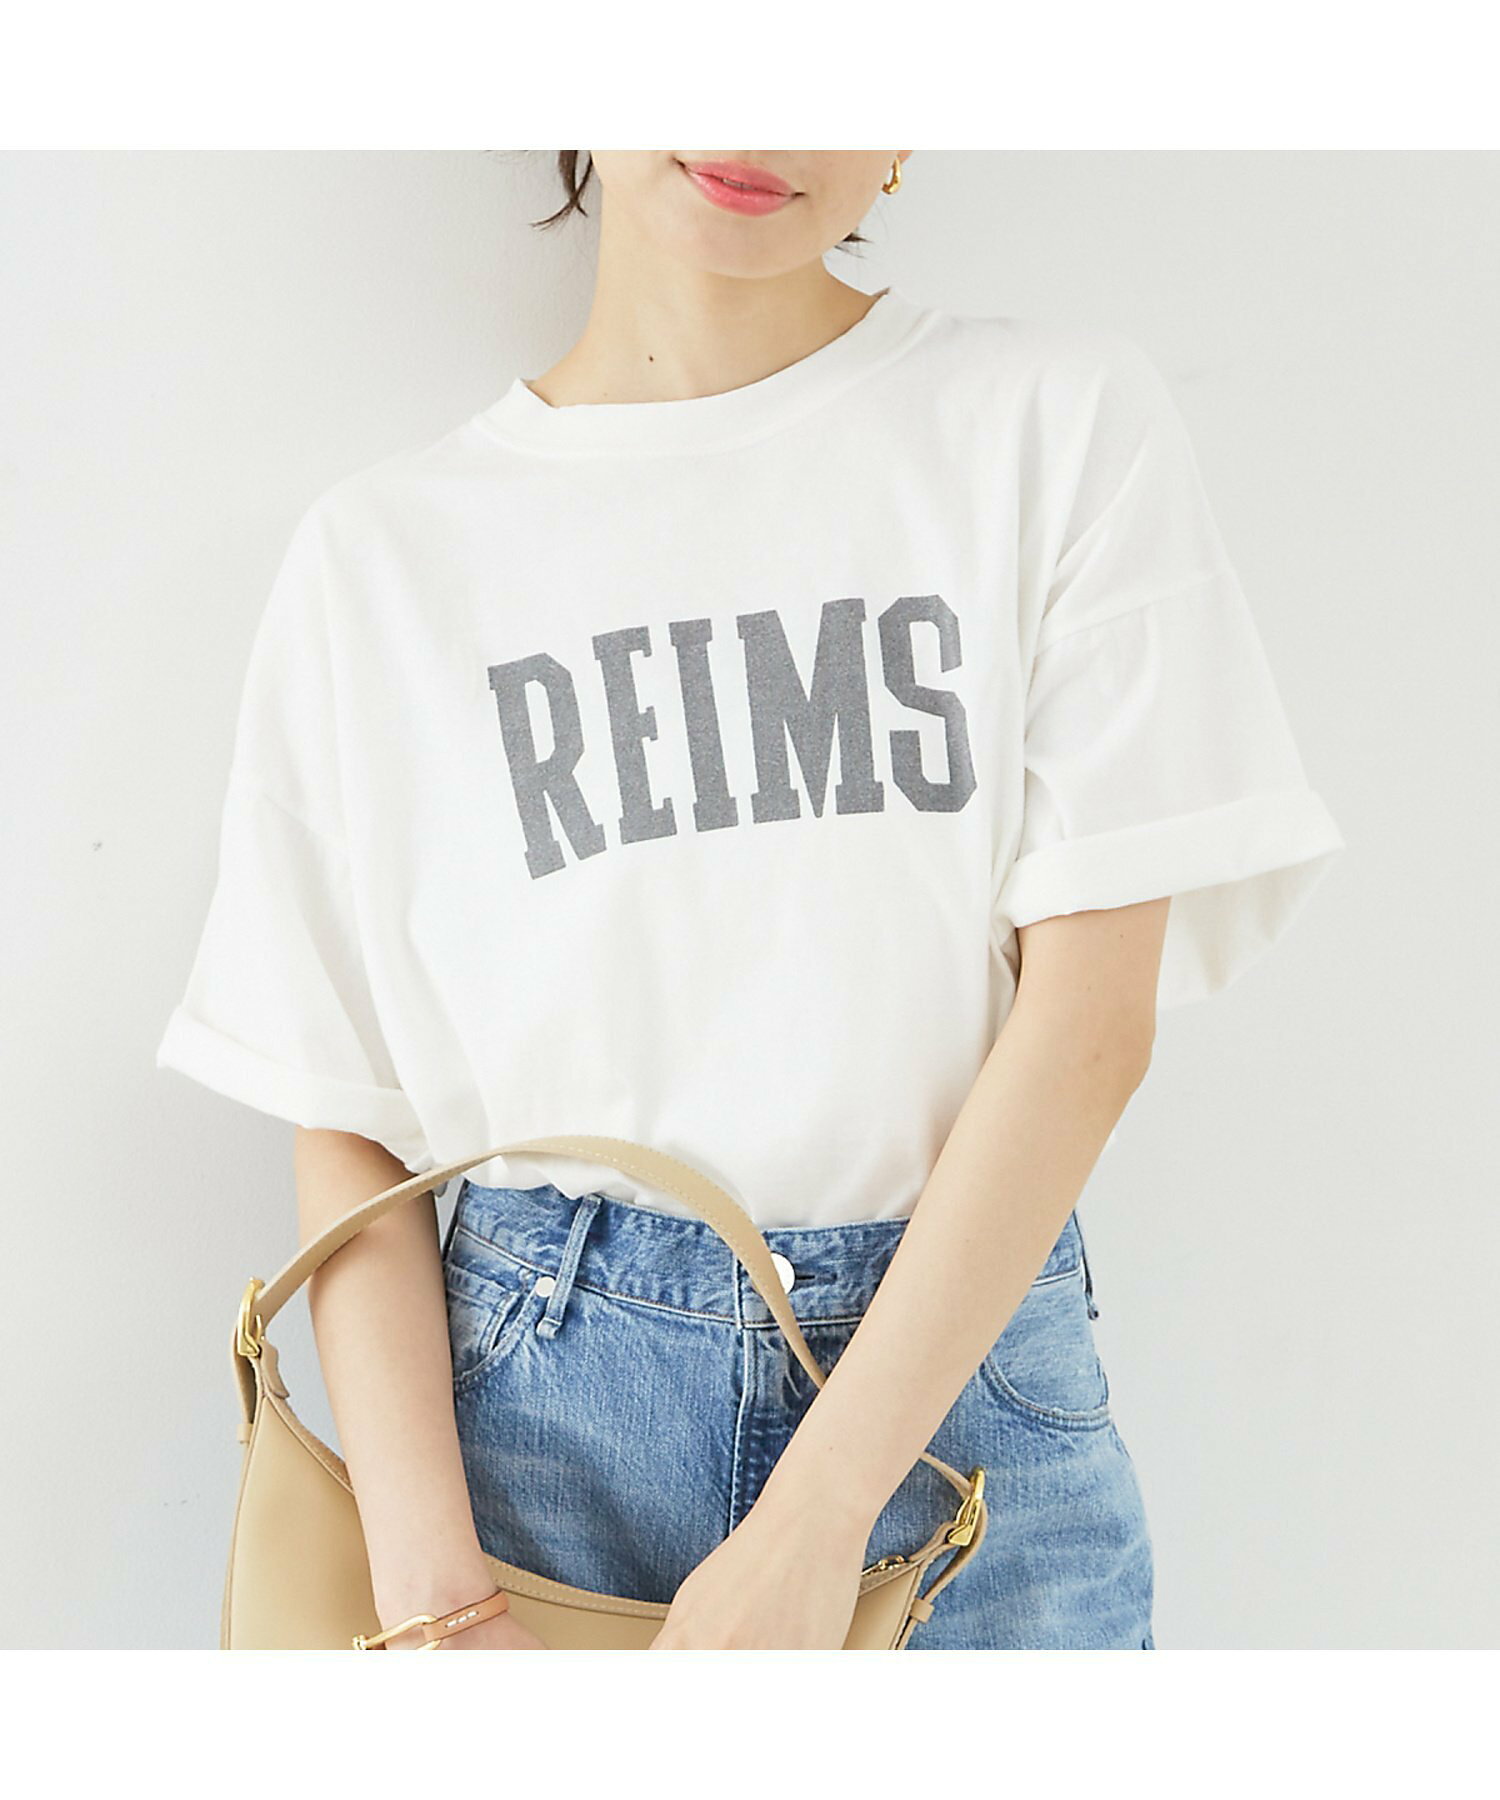 【REMI RELIEF/レミレリーフ】別注 REIMS Tシャツ【予約】